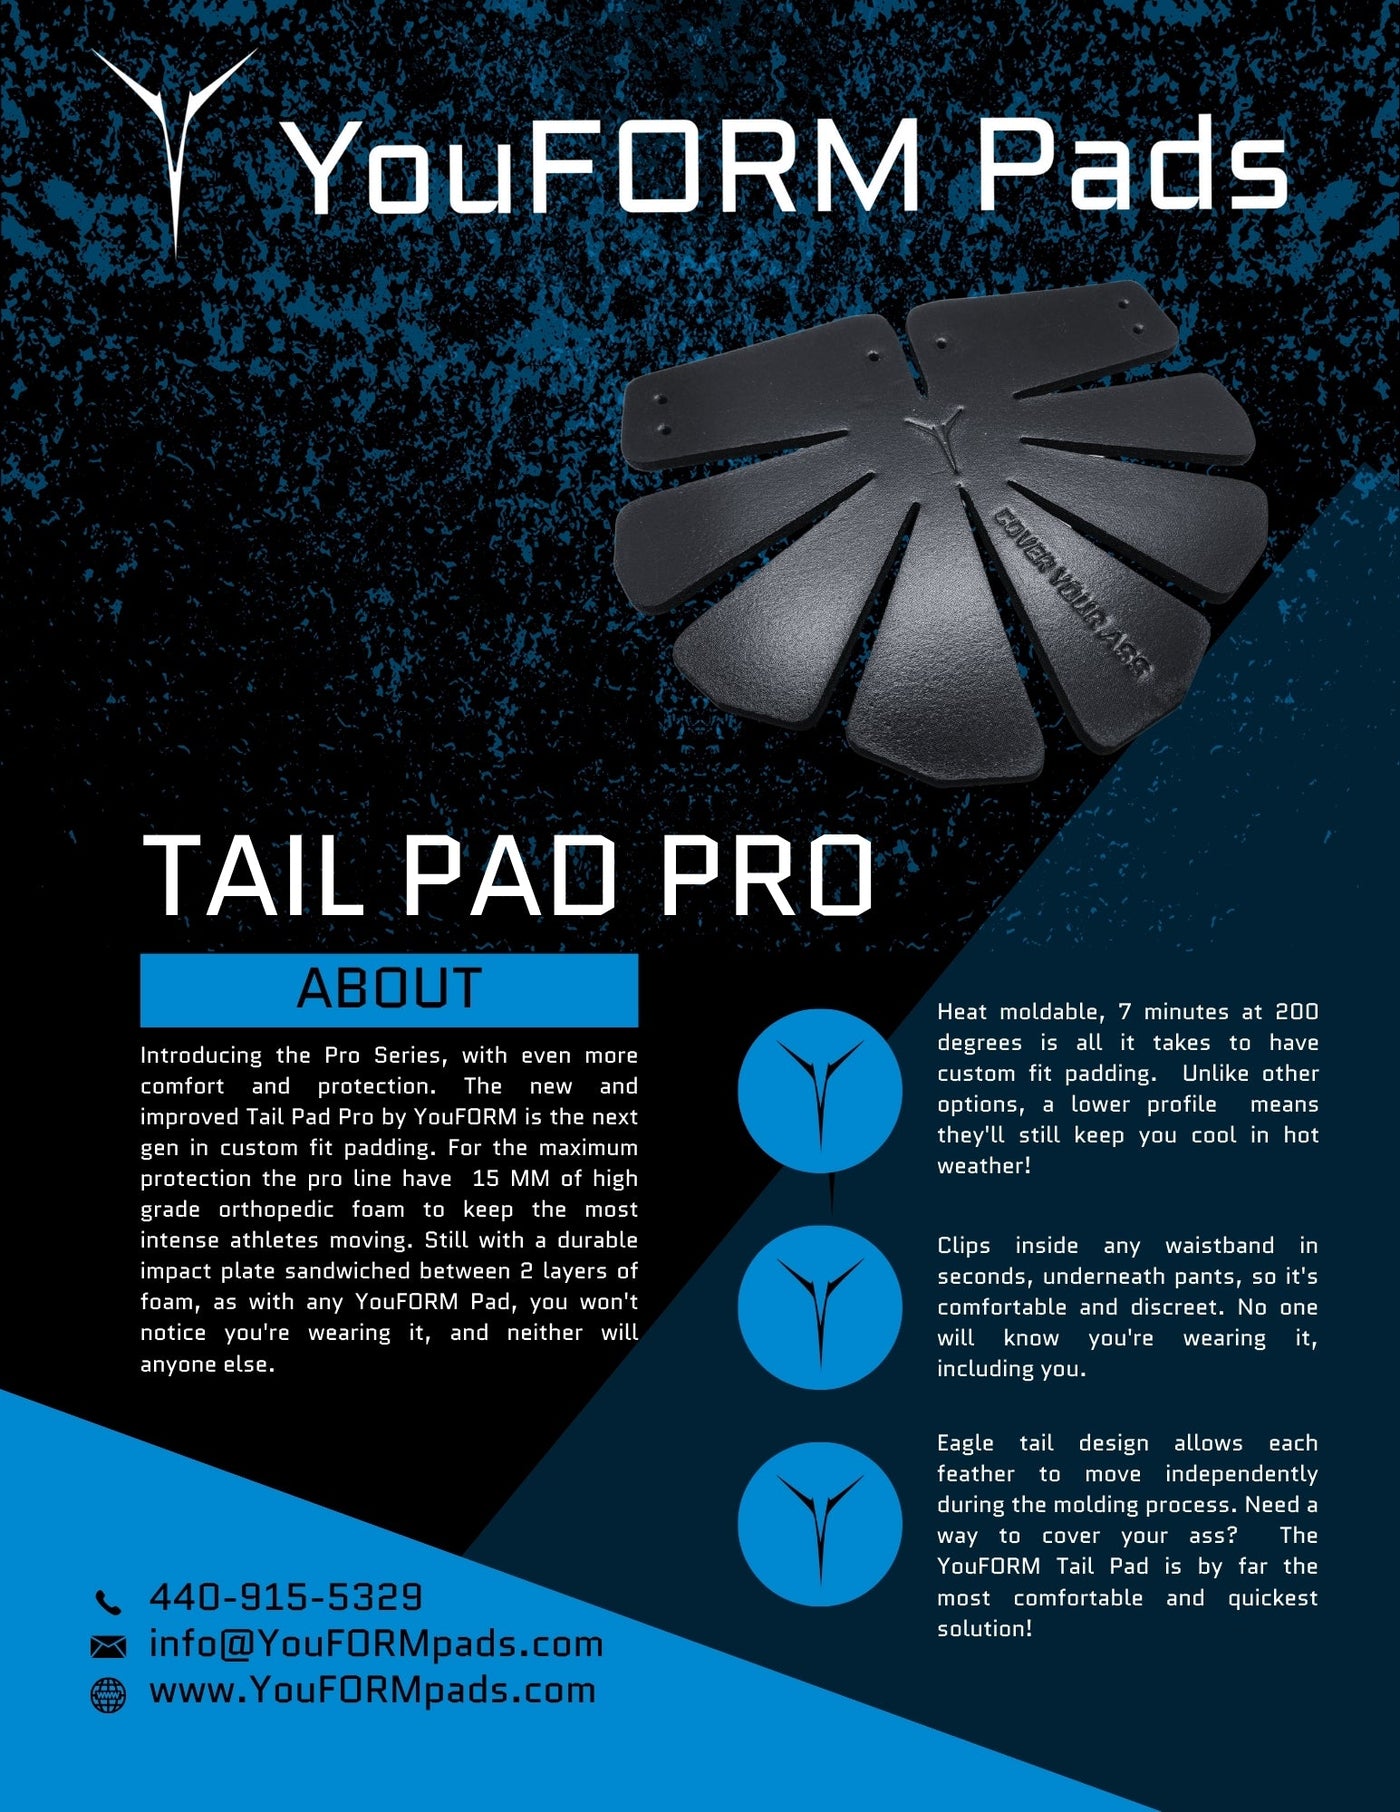 Tail Pad Pro by YouFORM